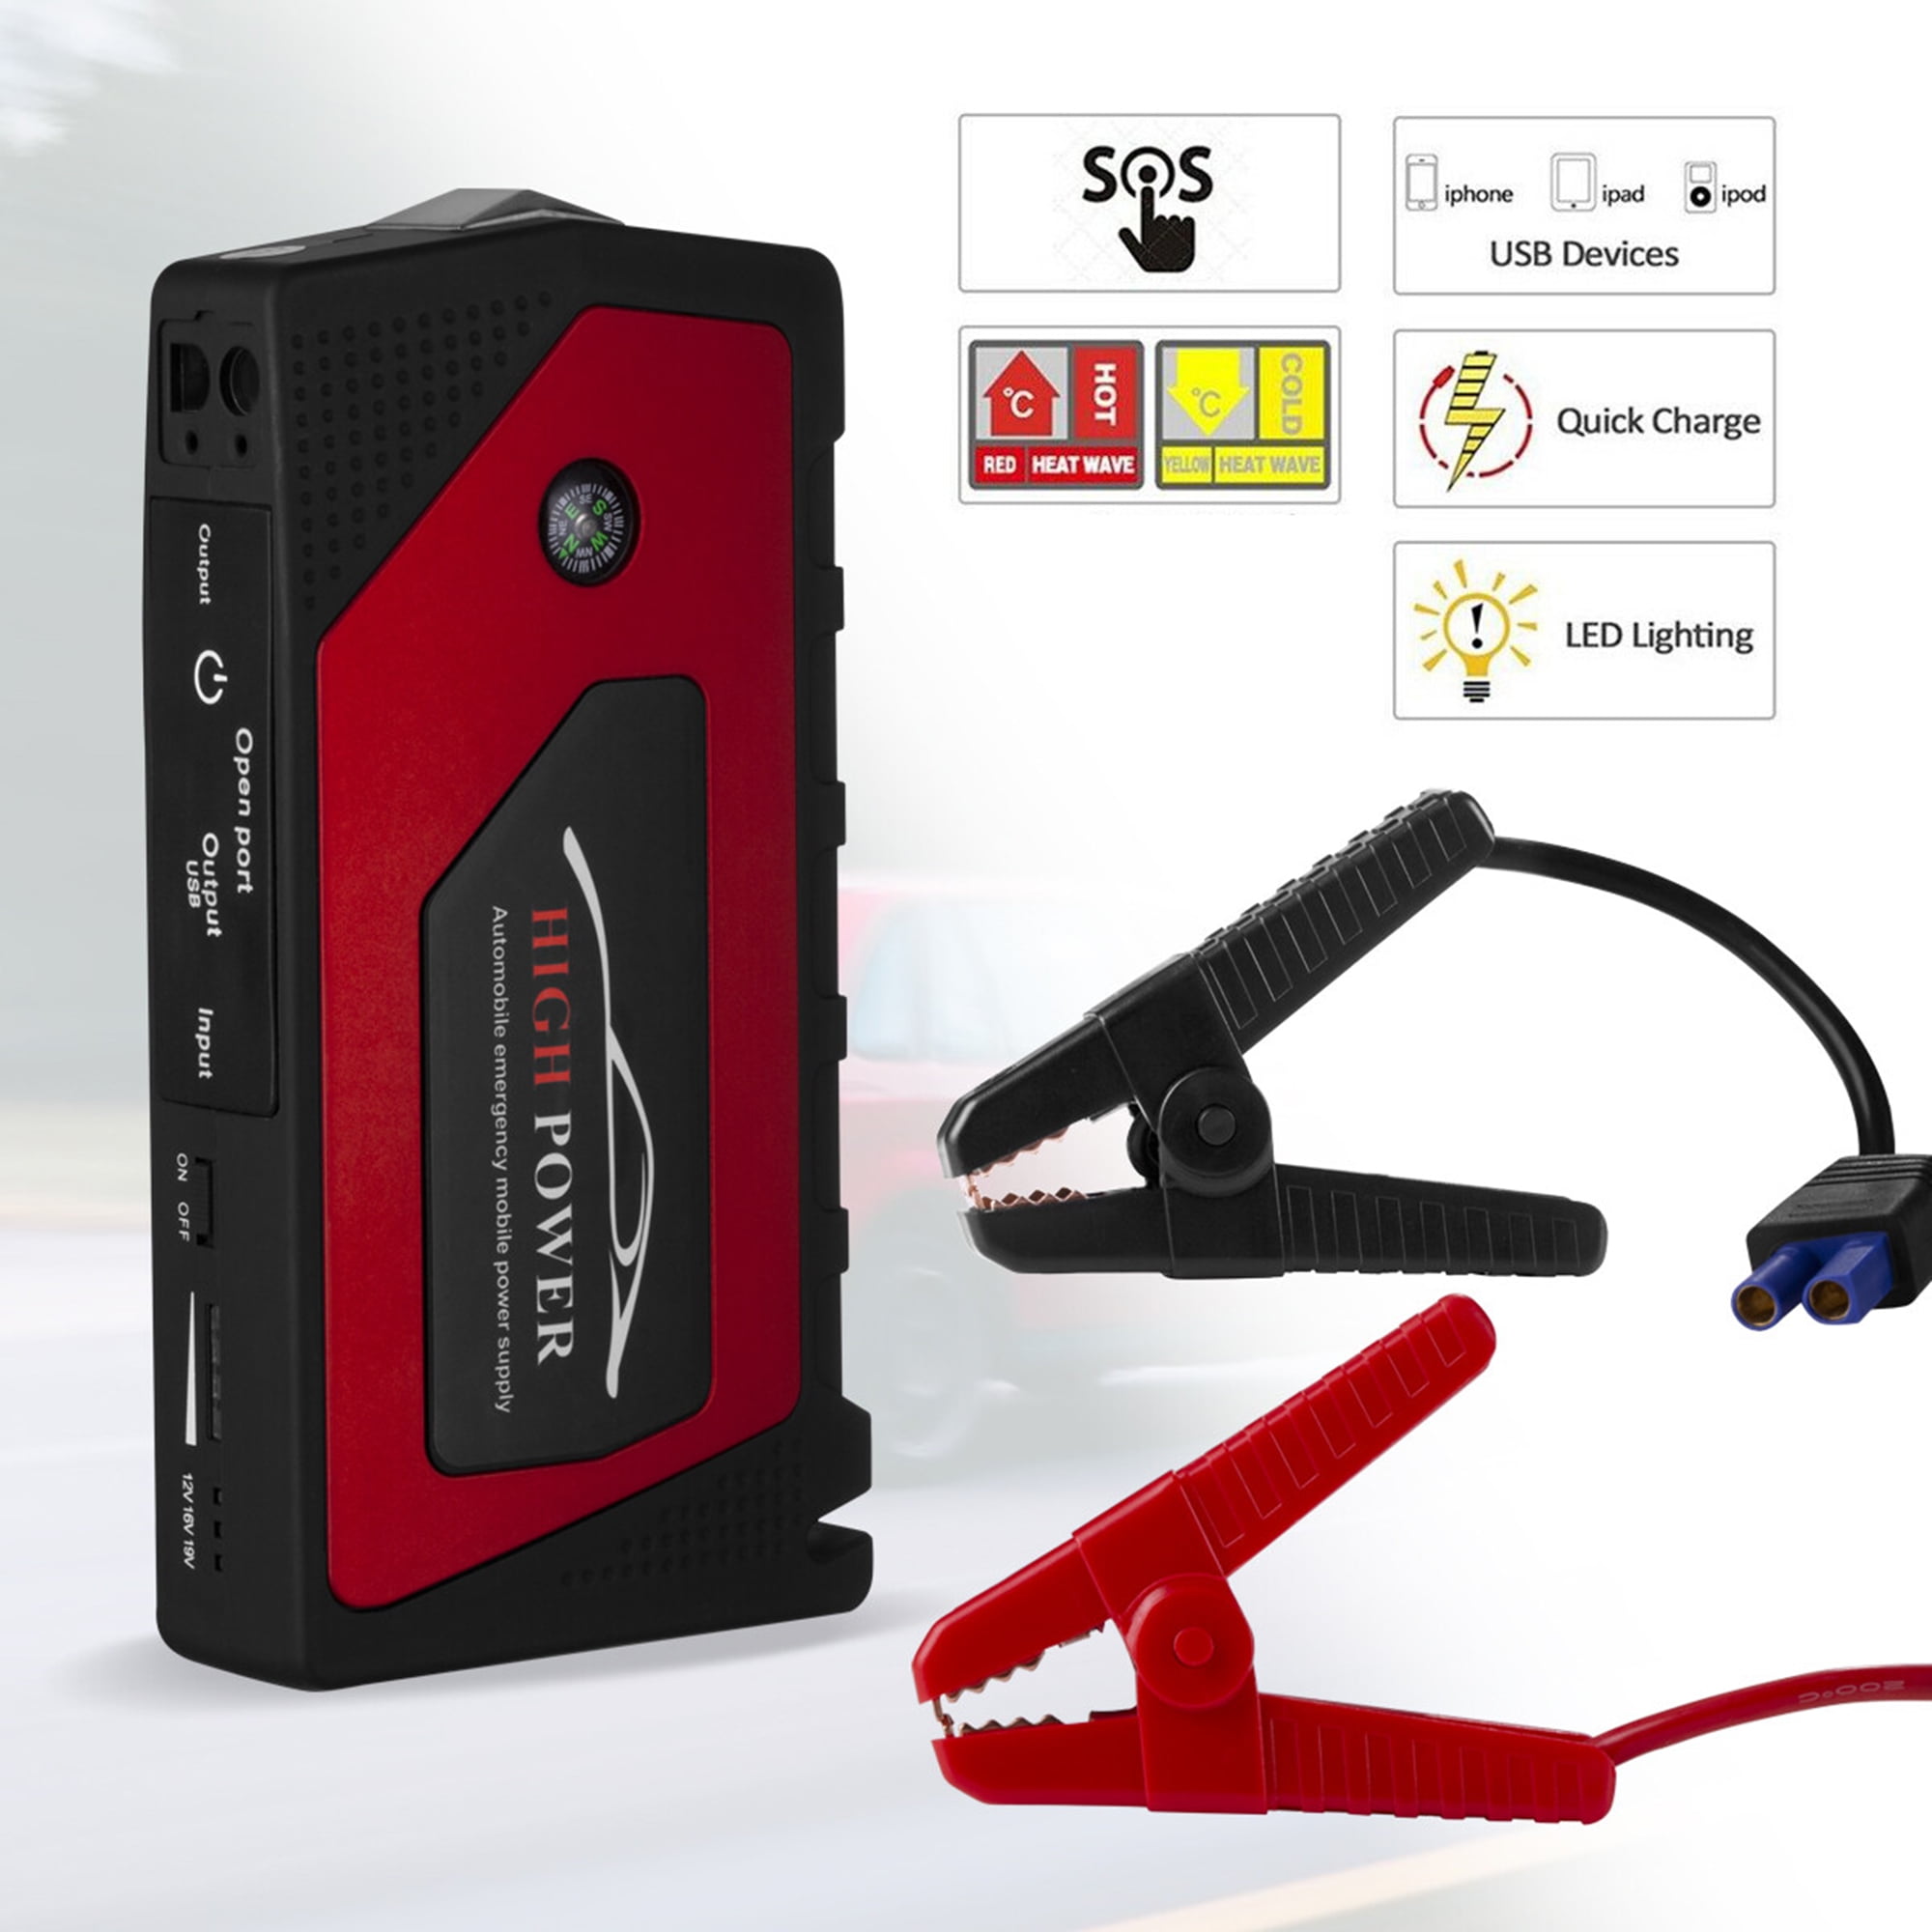 Portable Battery Booster Pack Charger Power Heavy Duty Truck Jump Starter Box 